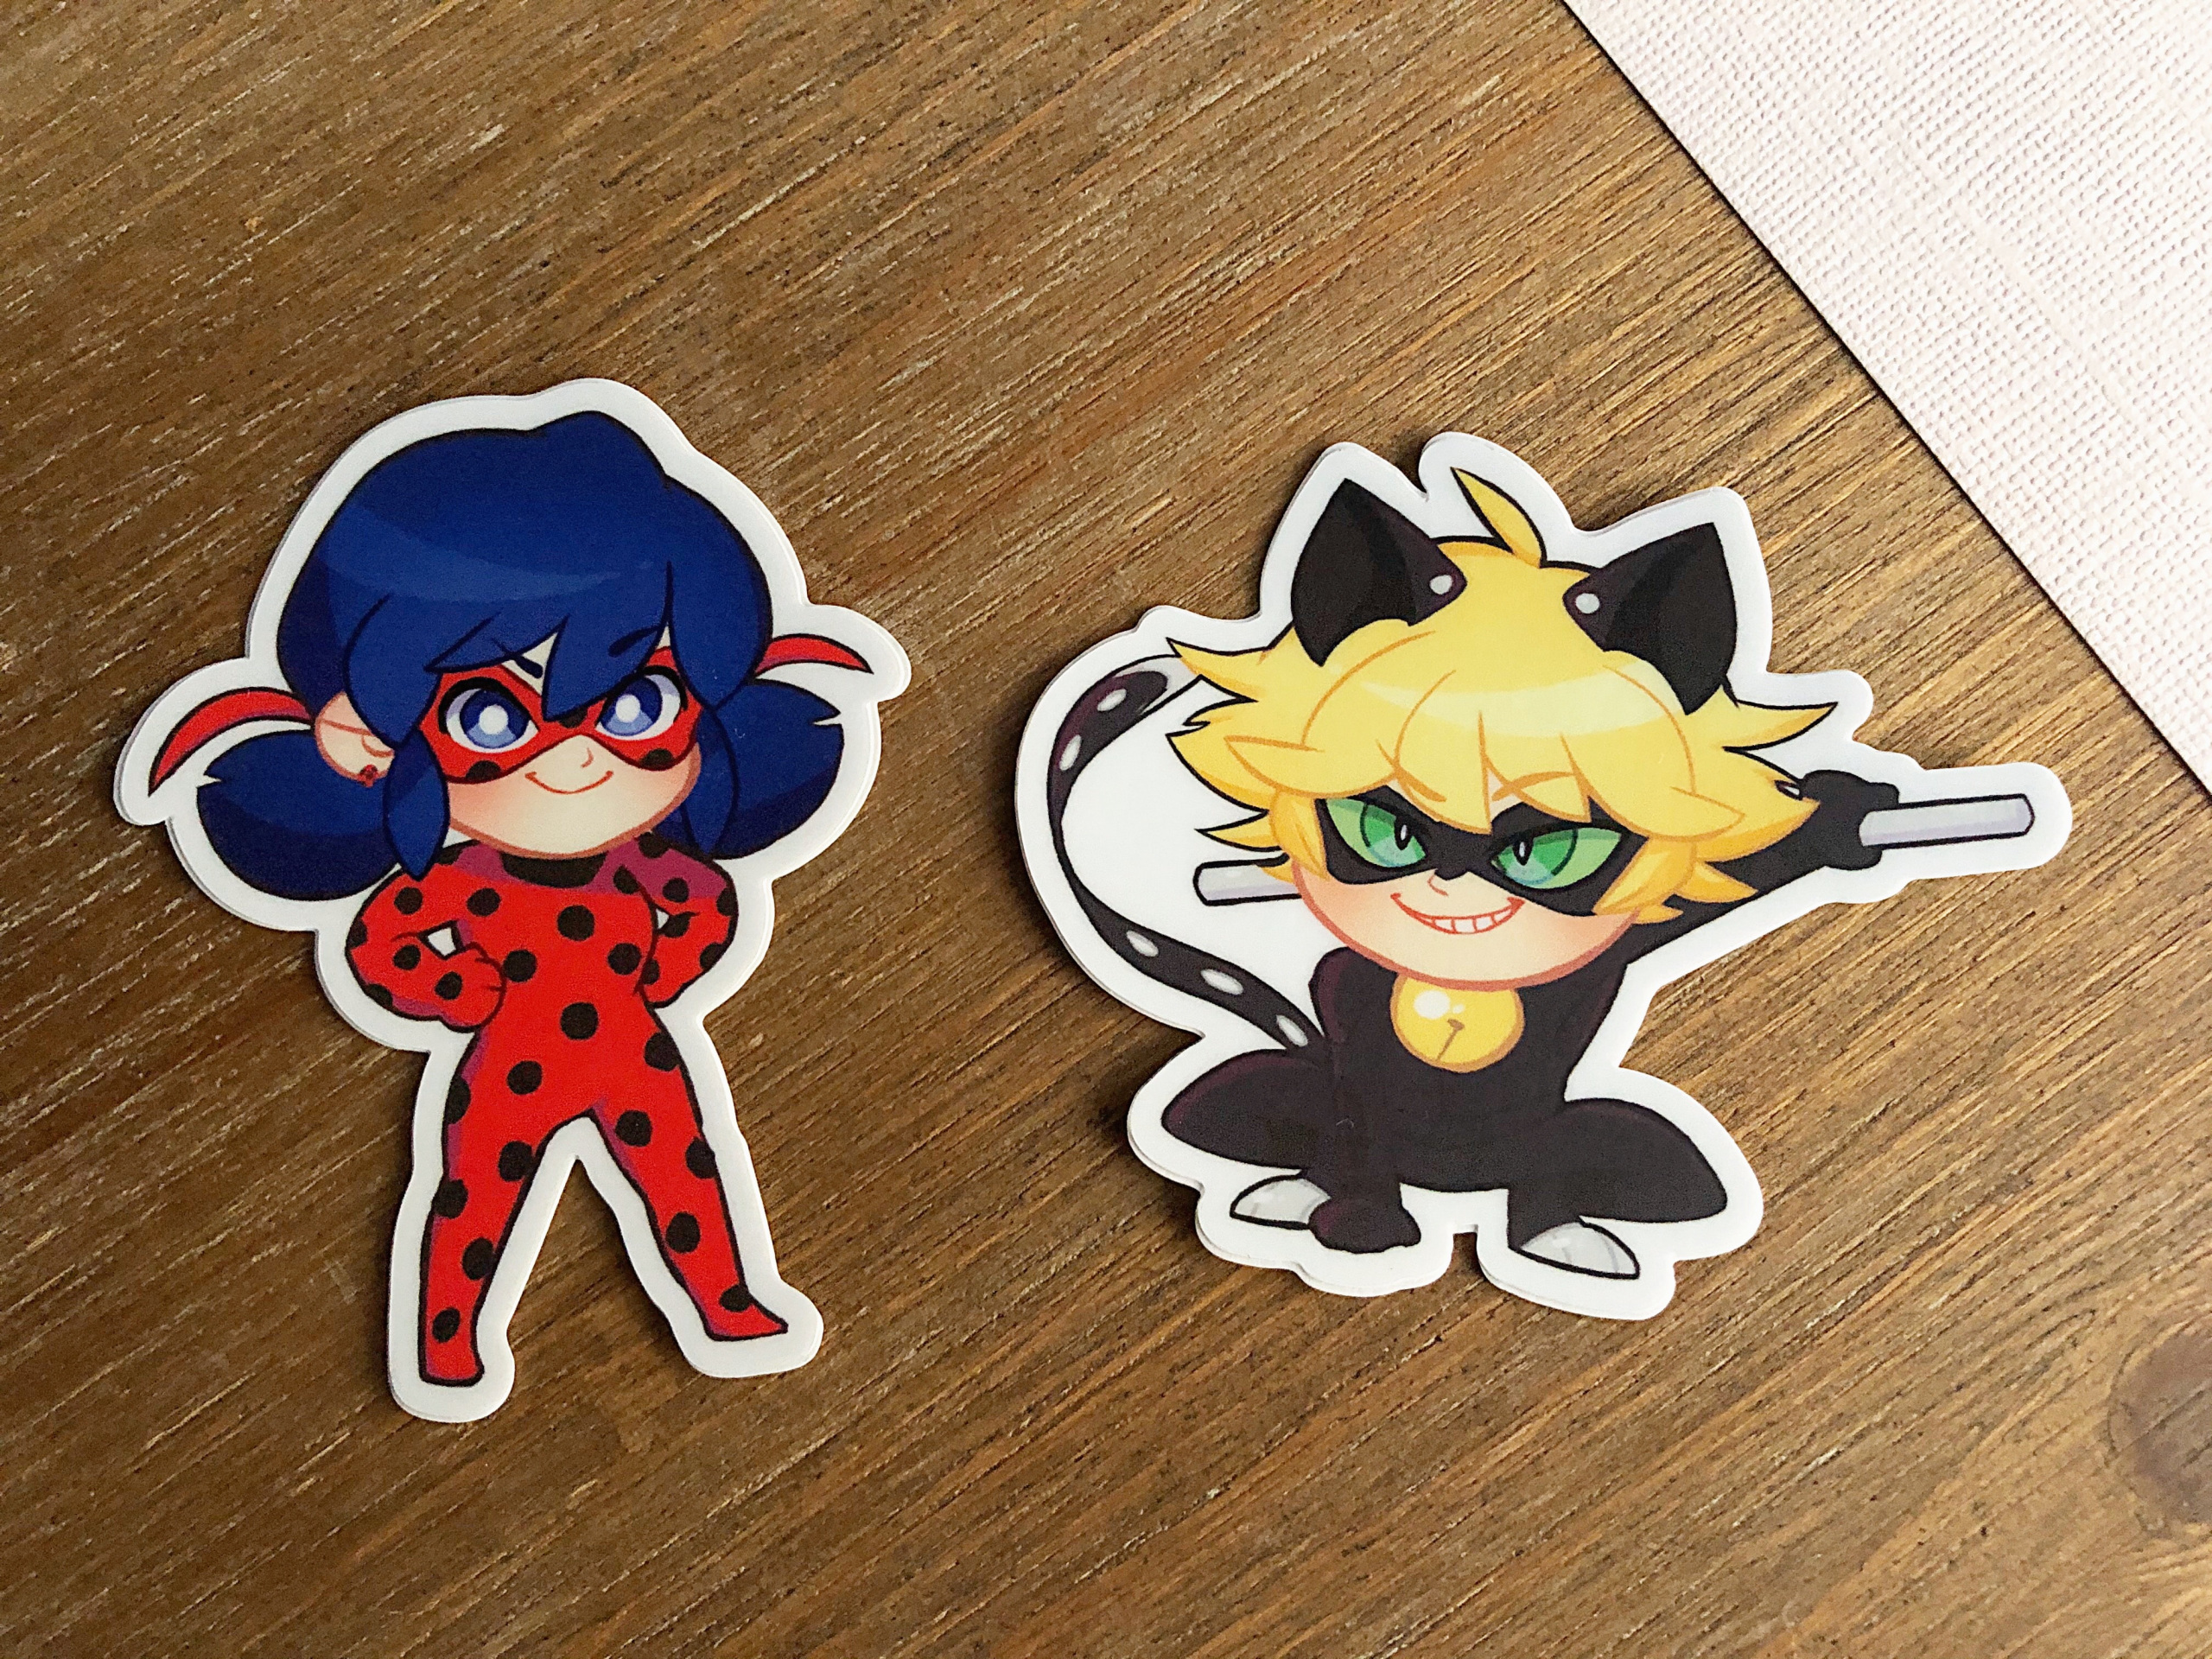 Miraculous Ladybug Chat Noir 3 Vinyl Stickers Art Of Margeaux Ducoing